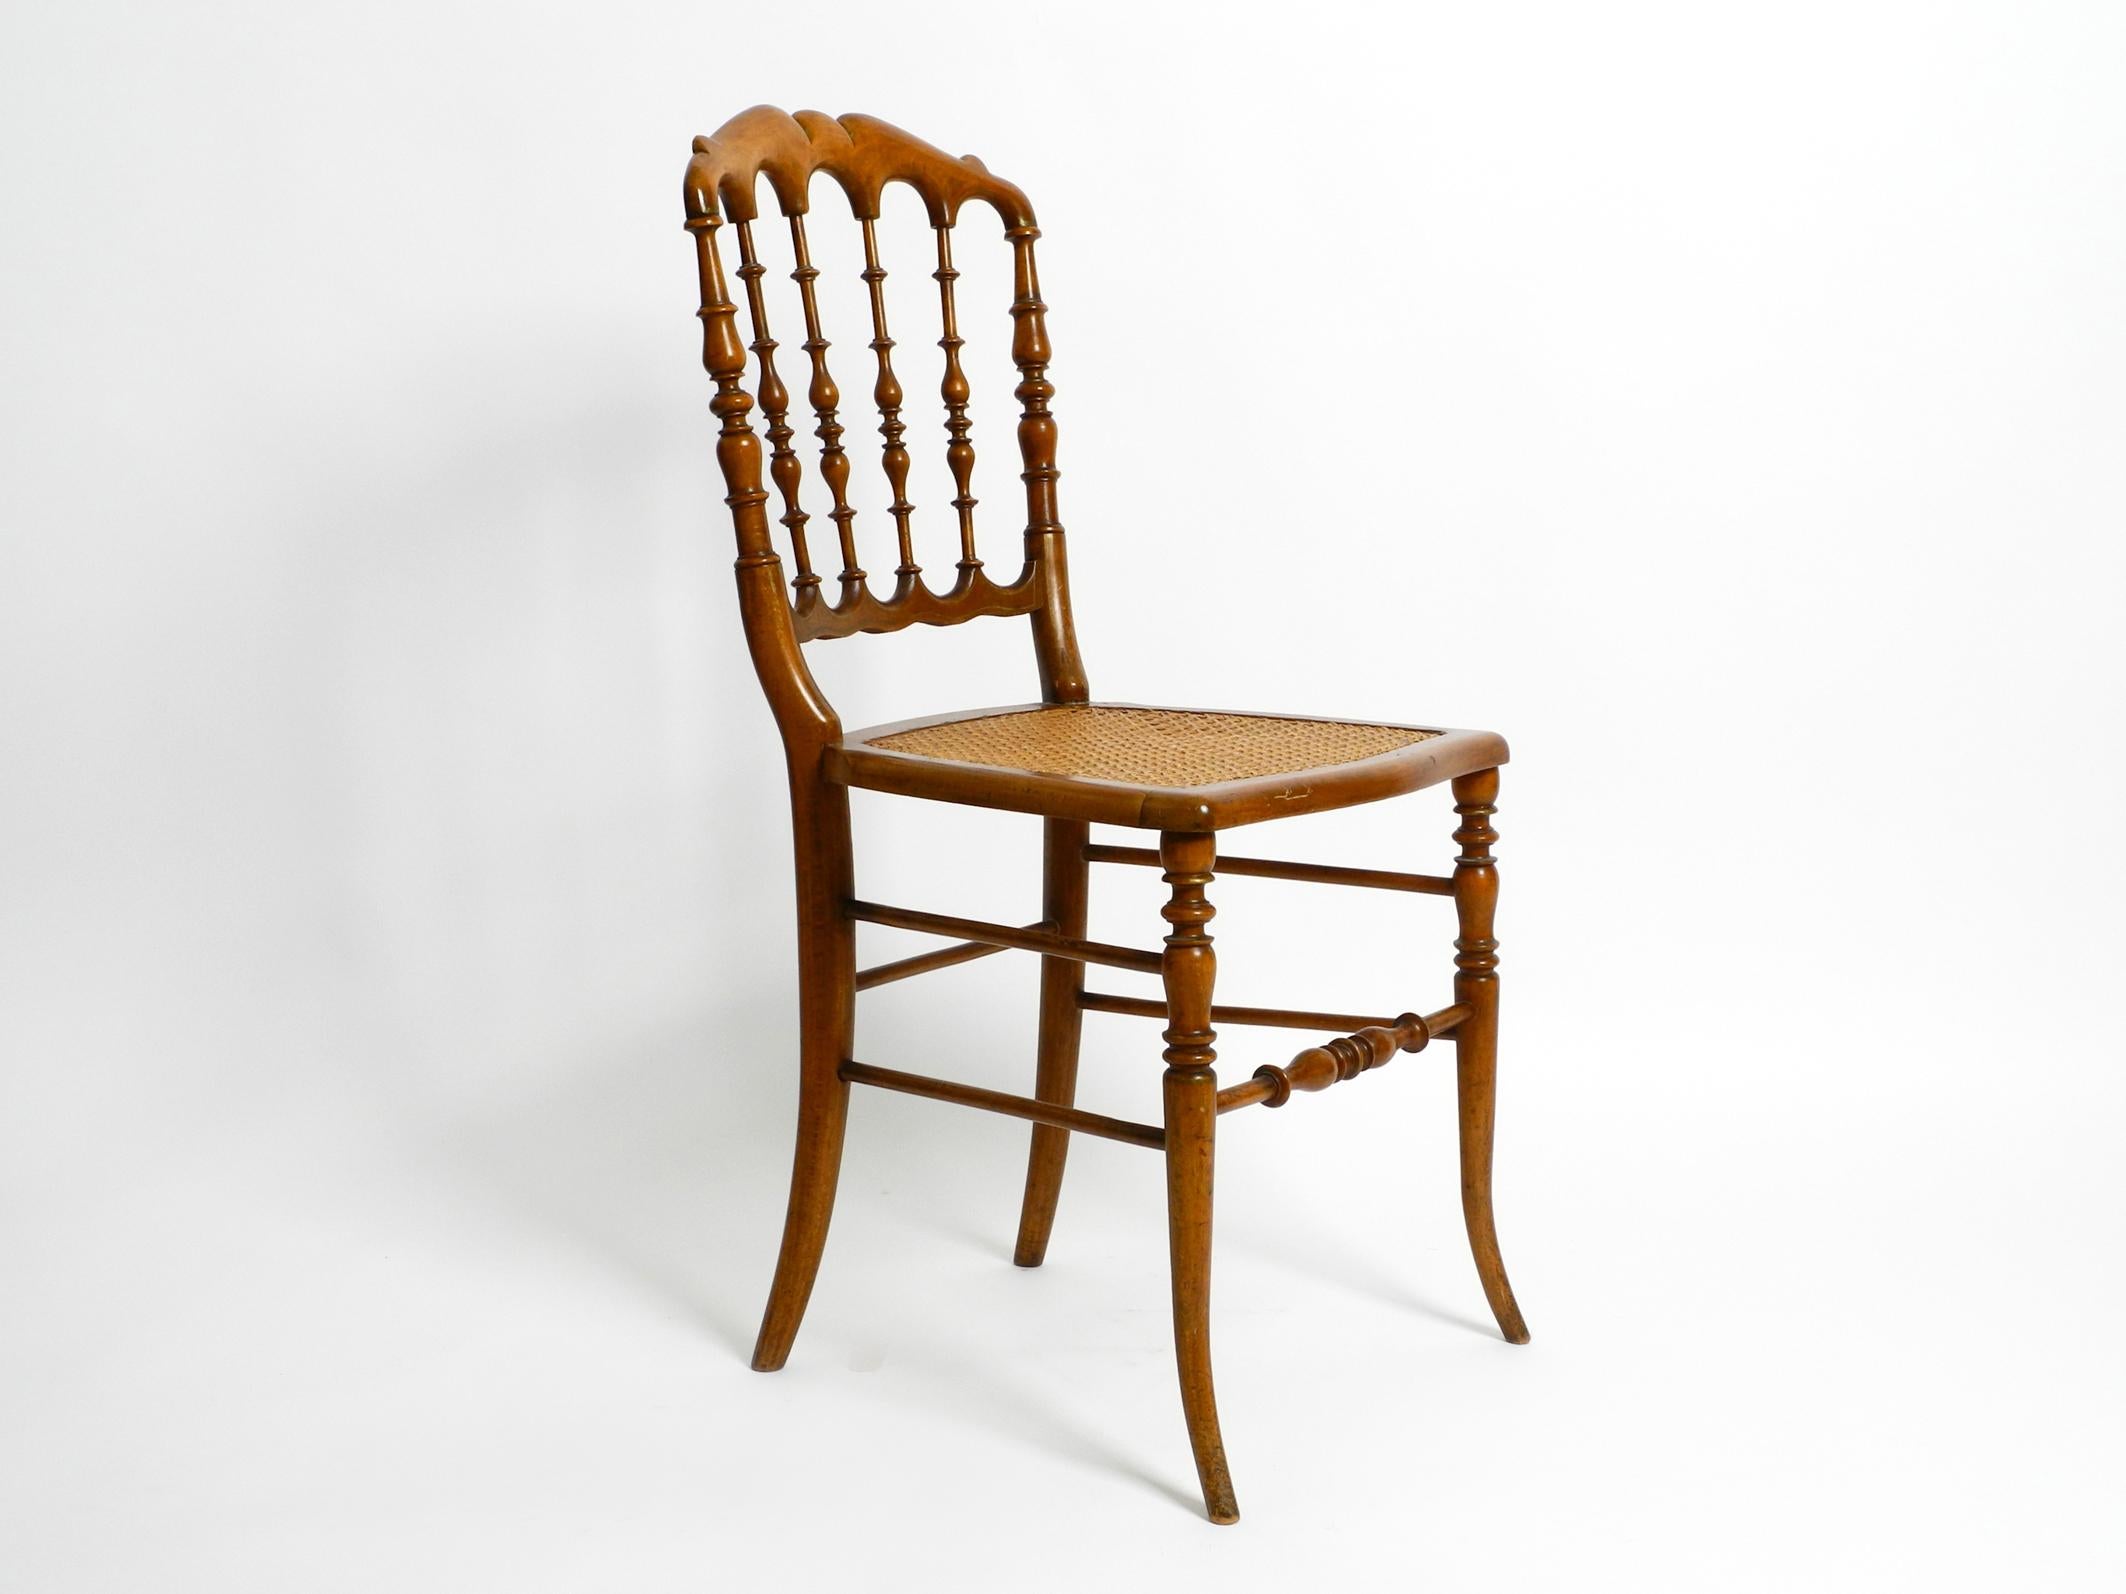 Extremely rare Italian mid-century Chiavari chair made of walnut wood with 
a seat made of Viennese wickerwork.
Based on the design by Giuseppe Gaetano Descalzi.
Descalzi (1767-1855) was a Genoese furniture maker best known for inventing the